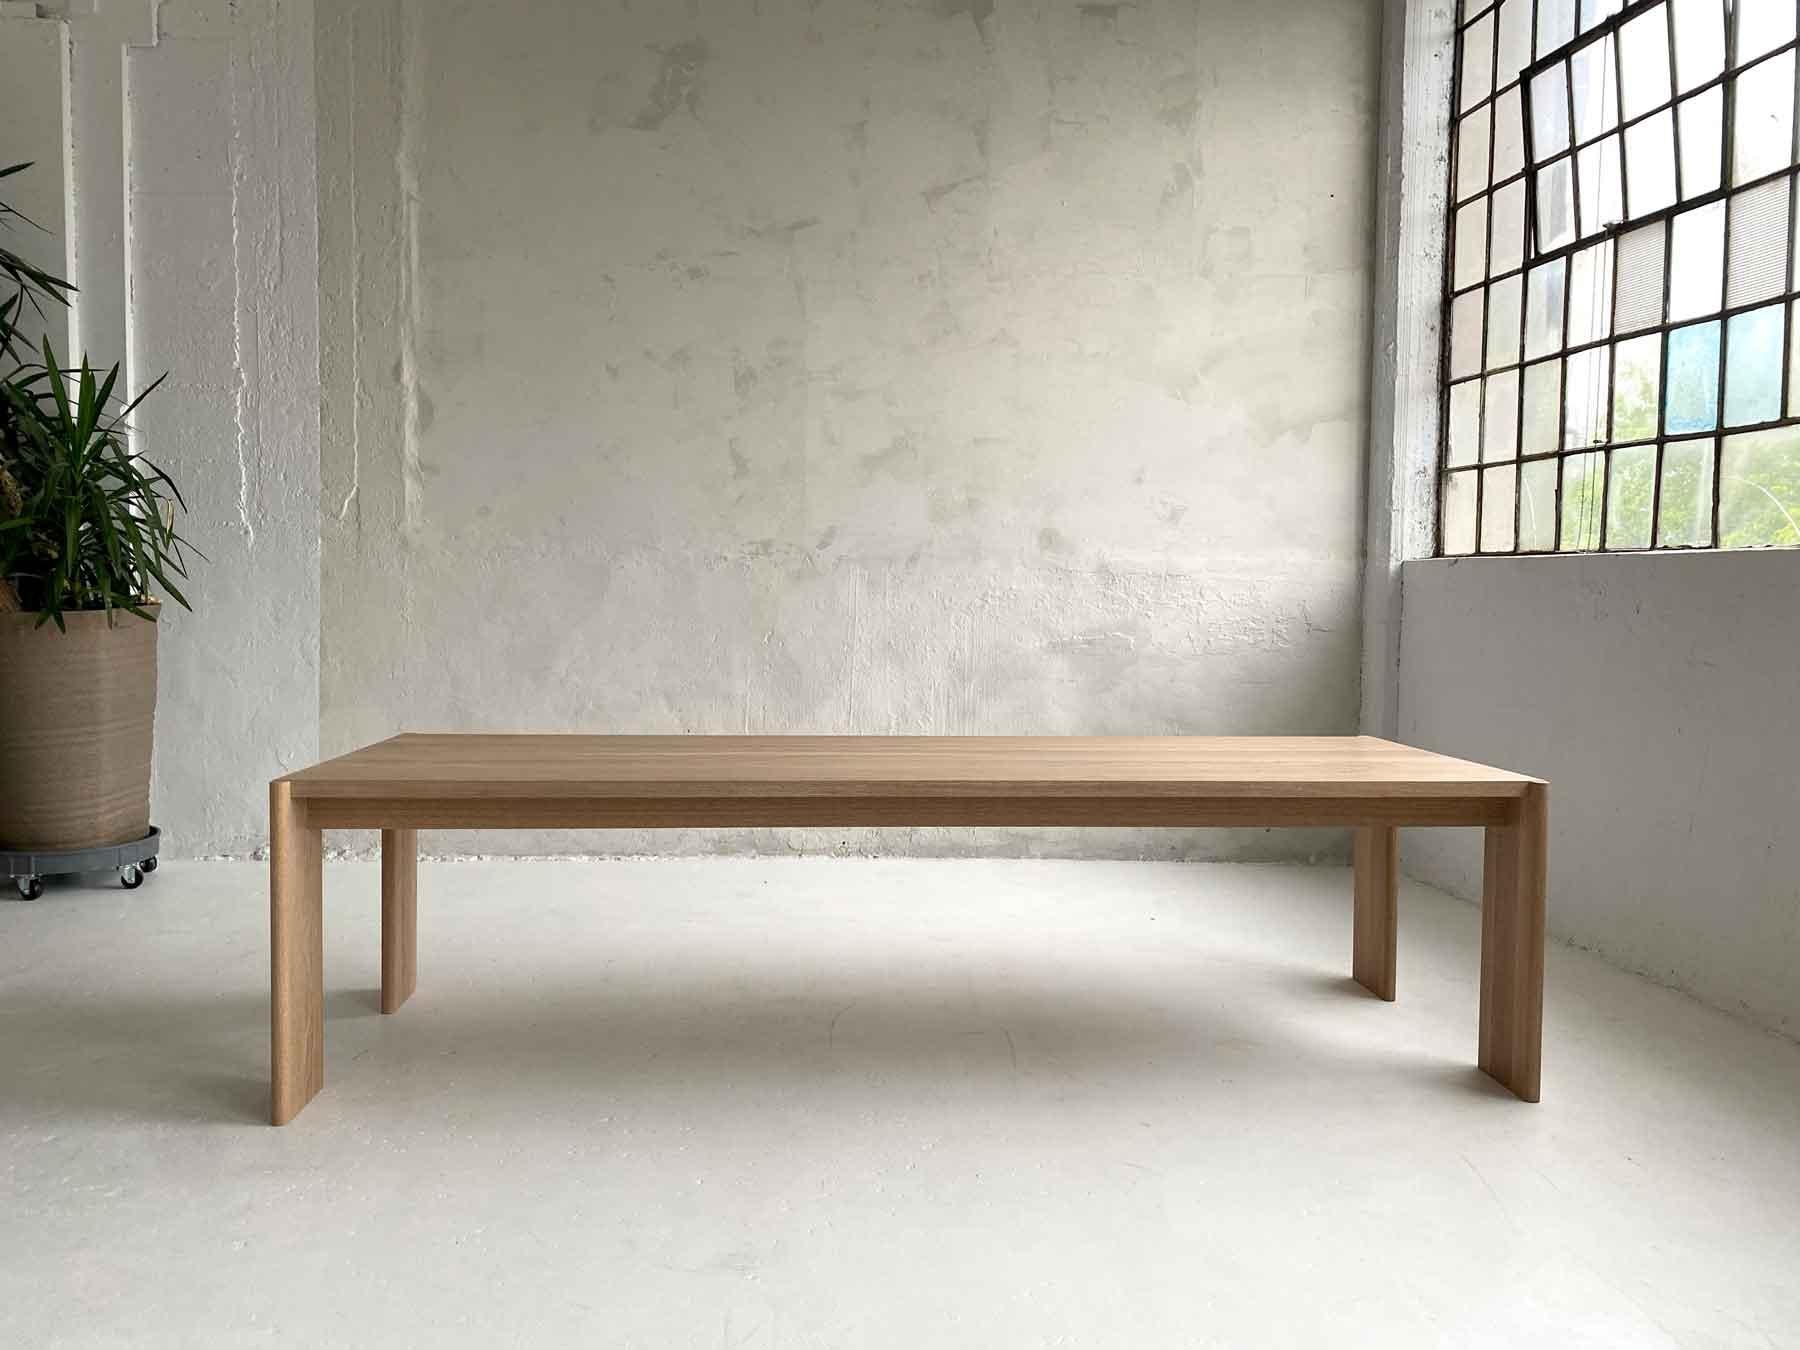 Inspired by casual luxury, our Curtis table is striking in its simplicity, a humble beauty. Clean lines and purposeful details make this piece both strong and soft, handsome. and elegant

We work with North American solid hardwoods on a